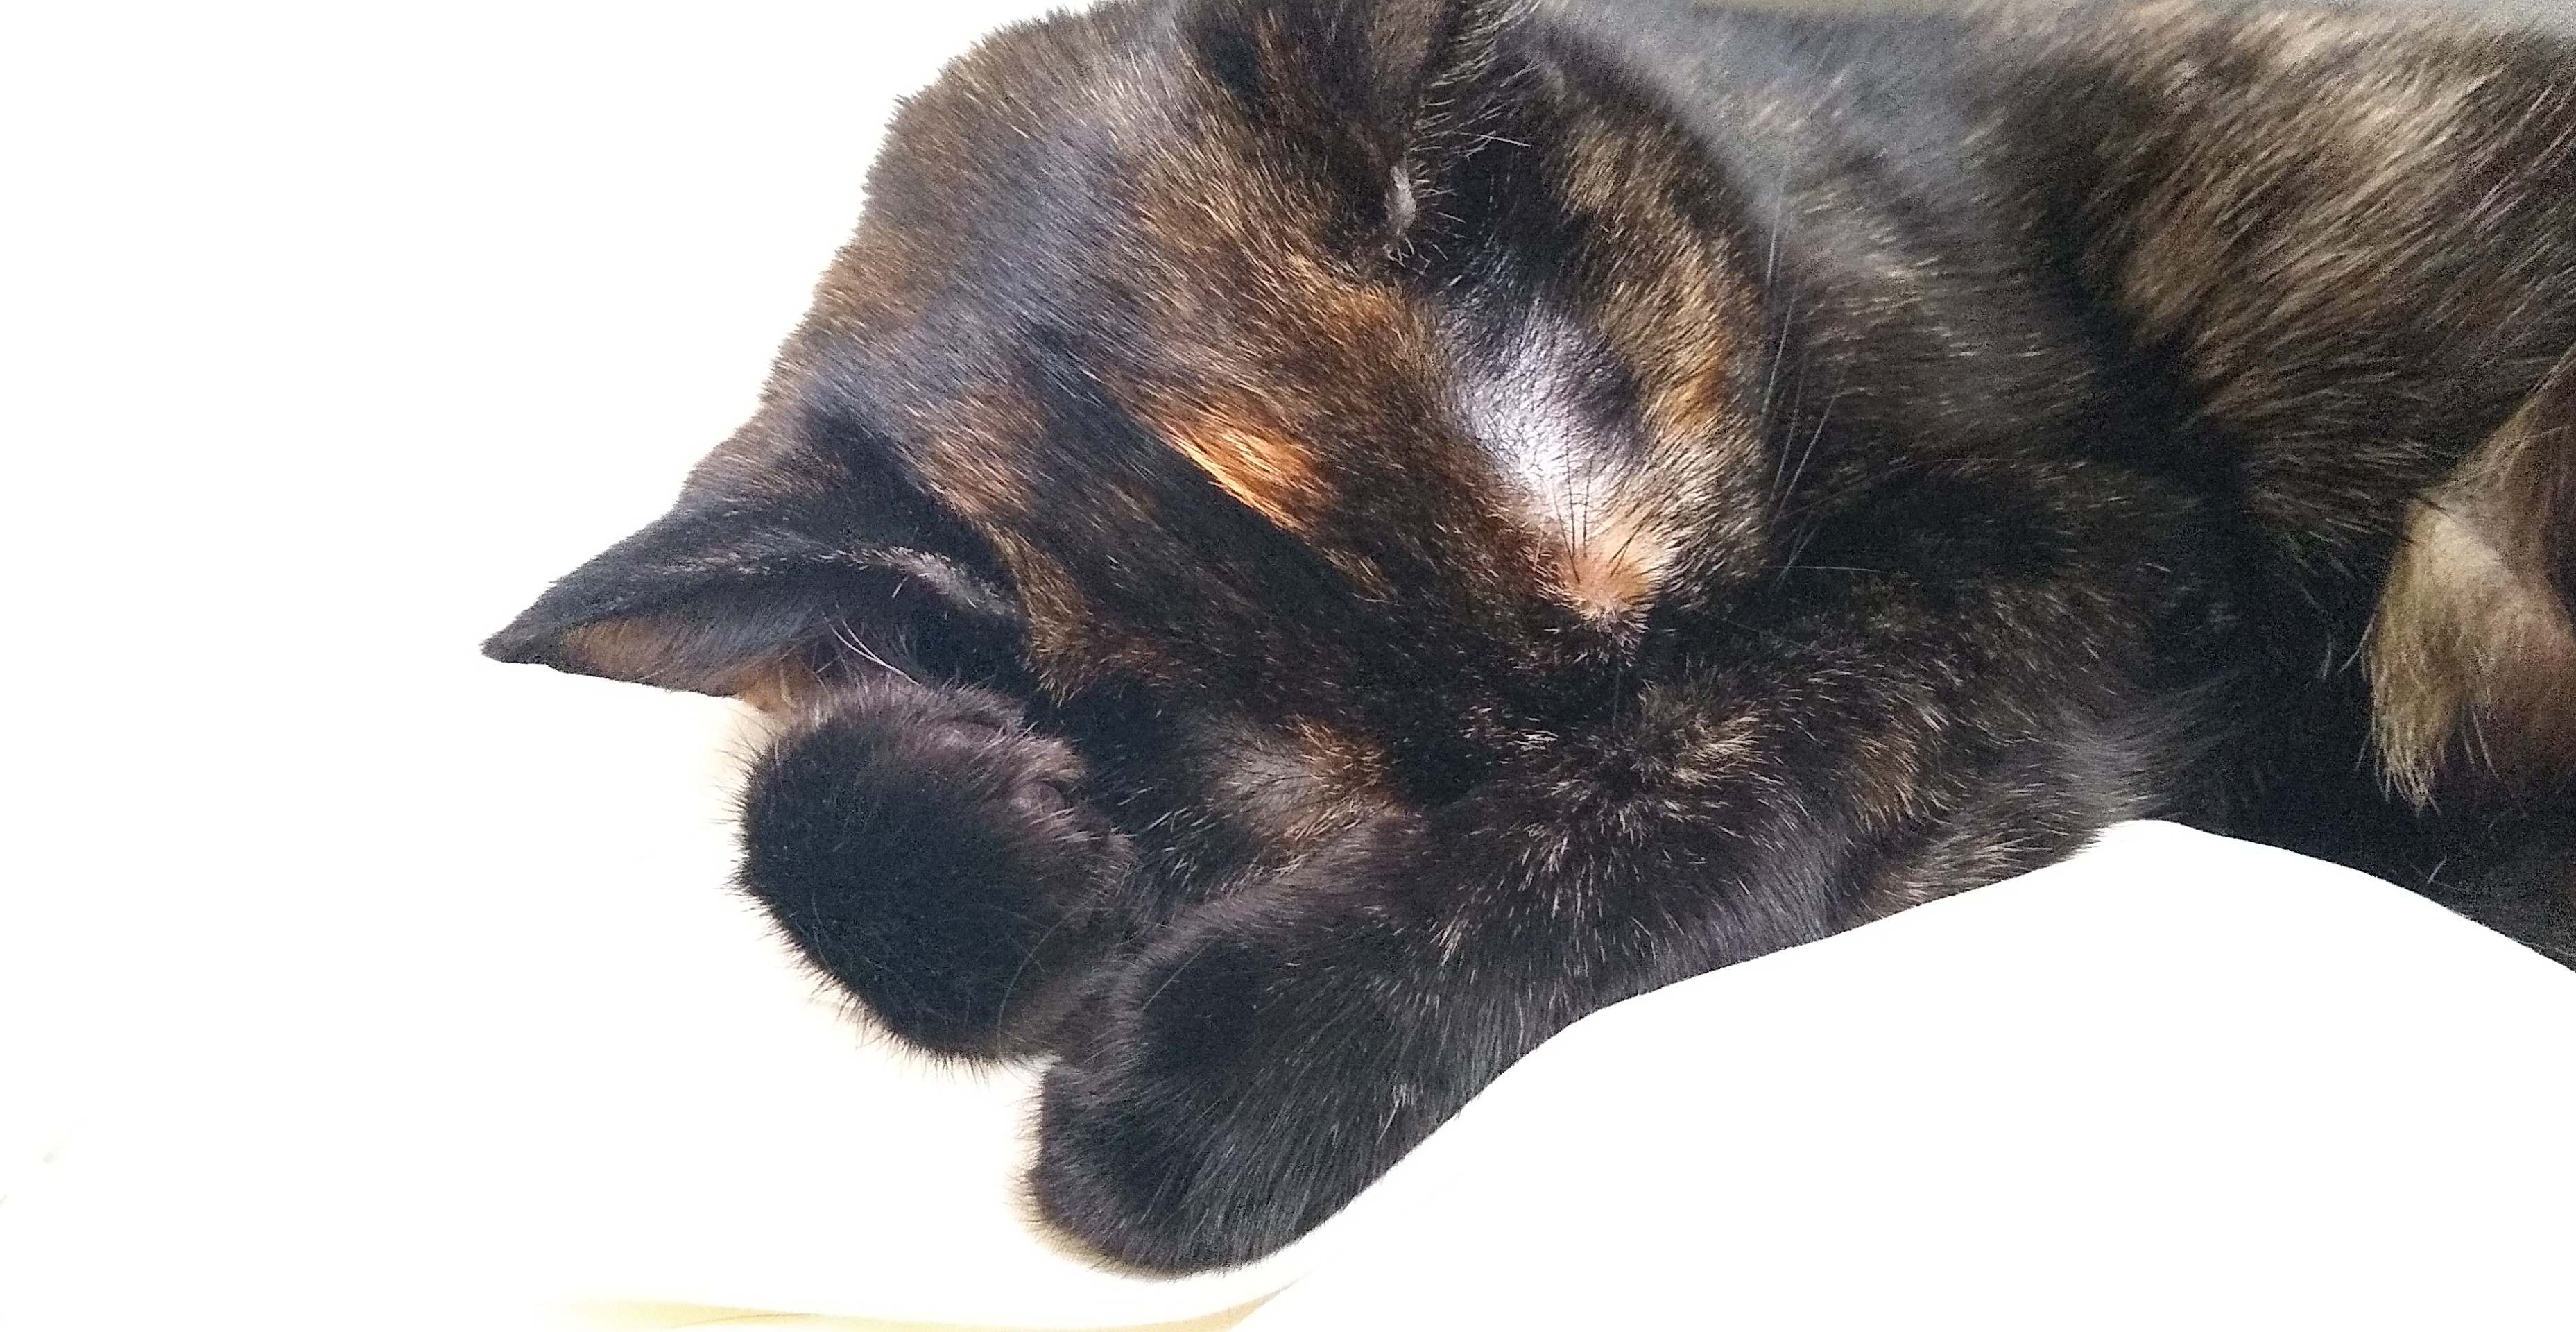 A photo of a tortoiseshell cat laying on a white blanket. She is asleep and has her head tucked in her arms. End ID.